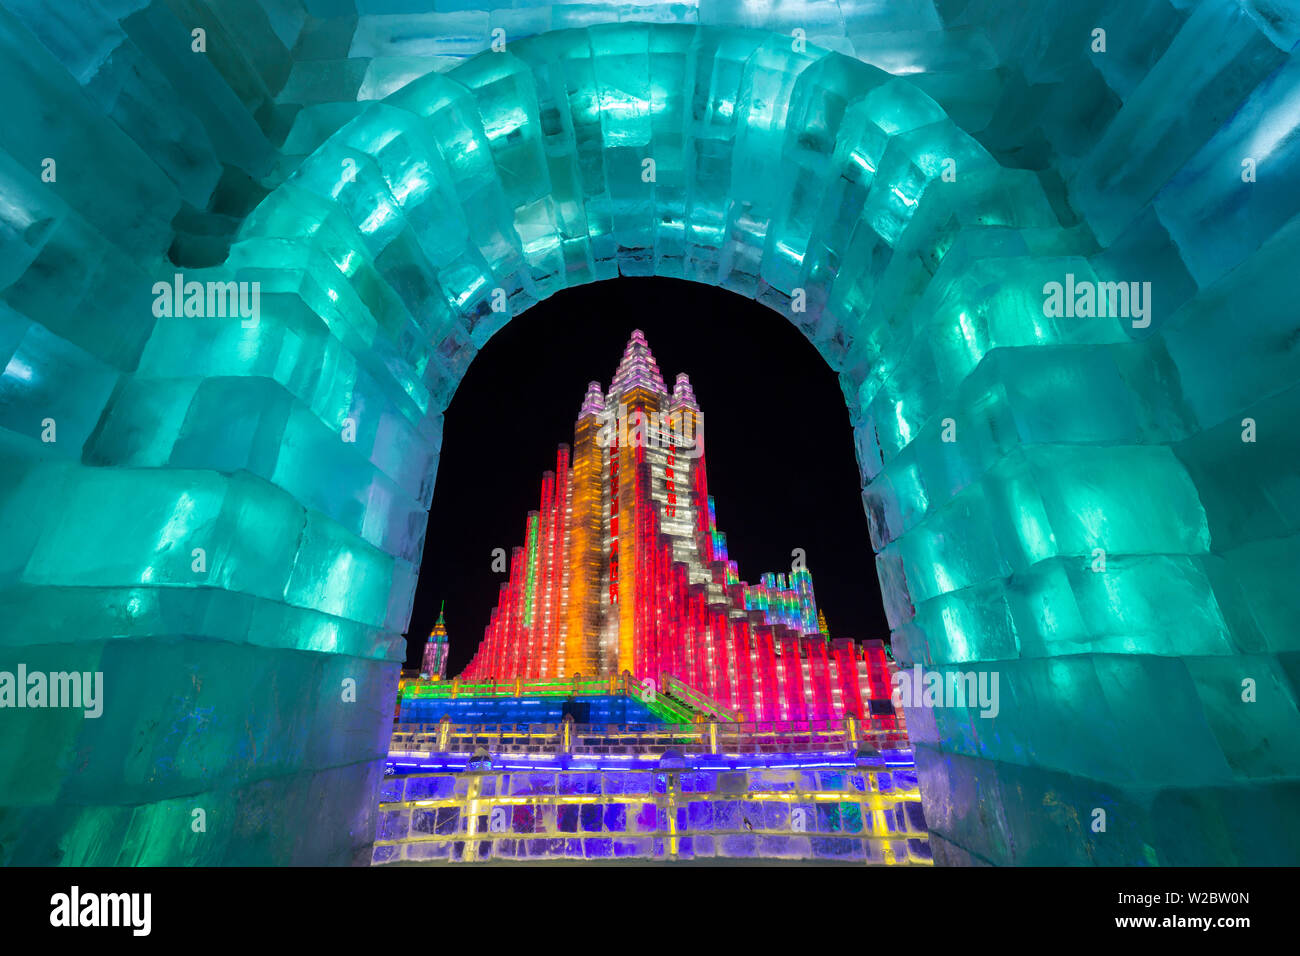 Spectacular illuminated ice sculptures at the Harbin Ice and Snow Festival in Heilongjiang Province, Harbin,  China Stock Photo